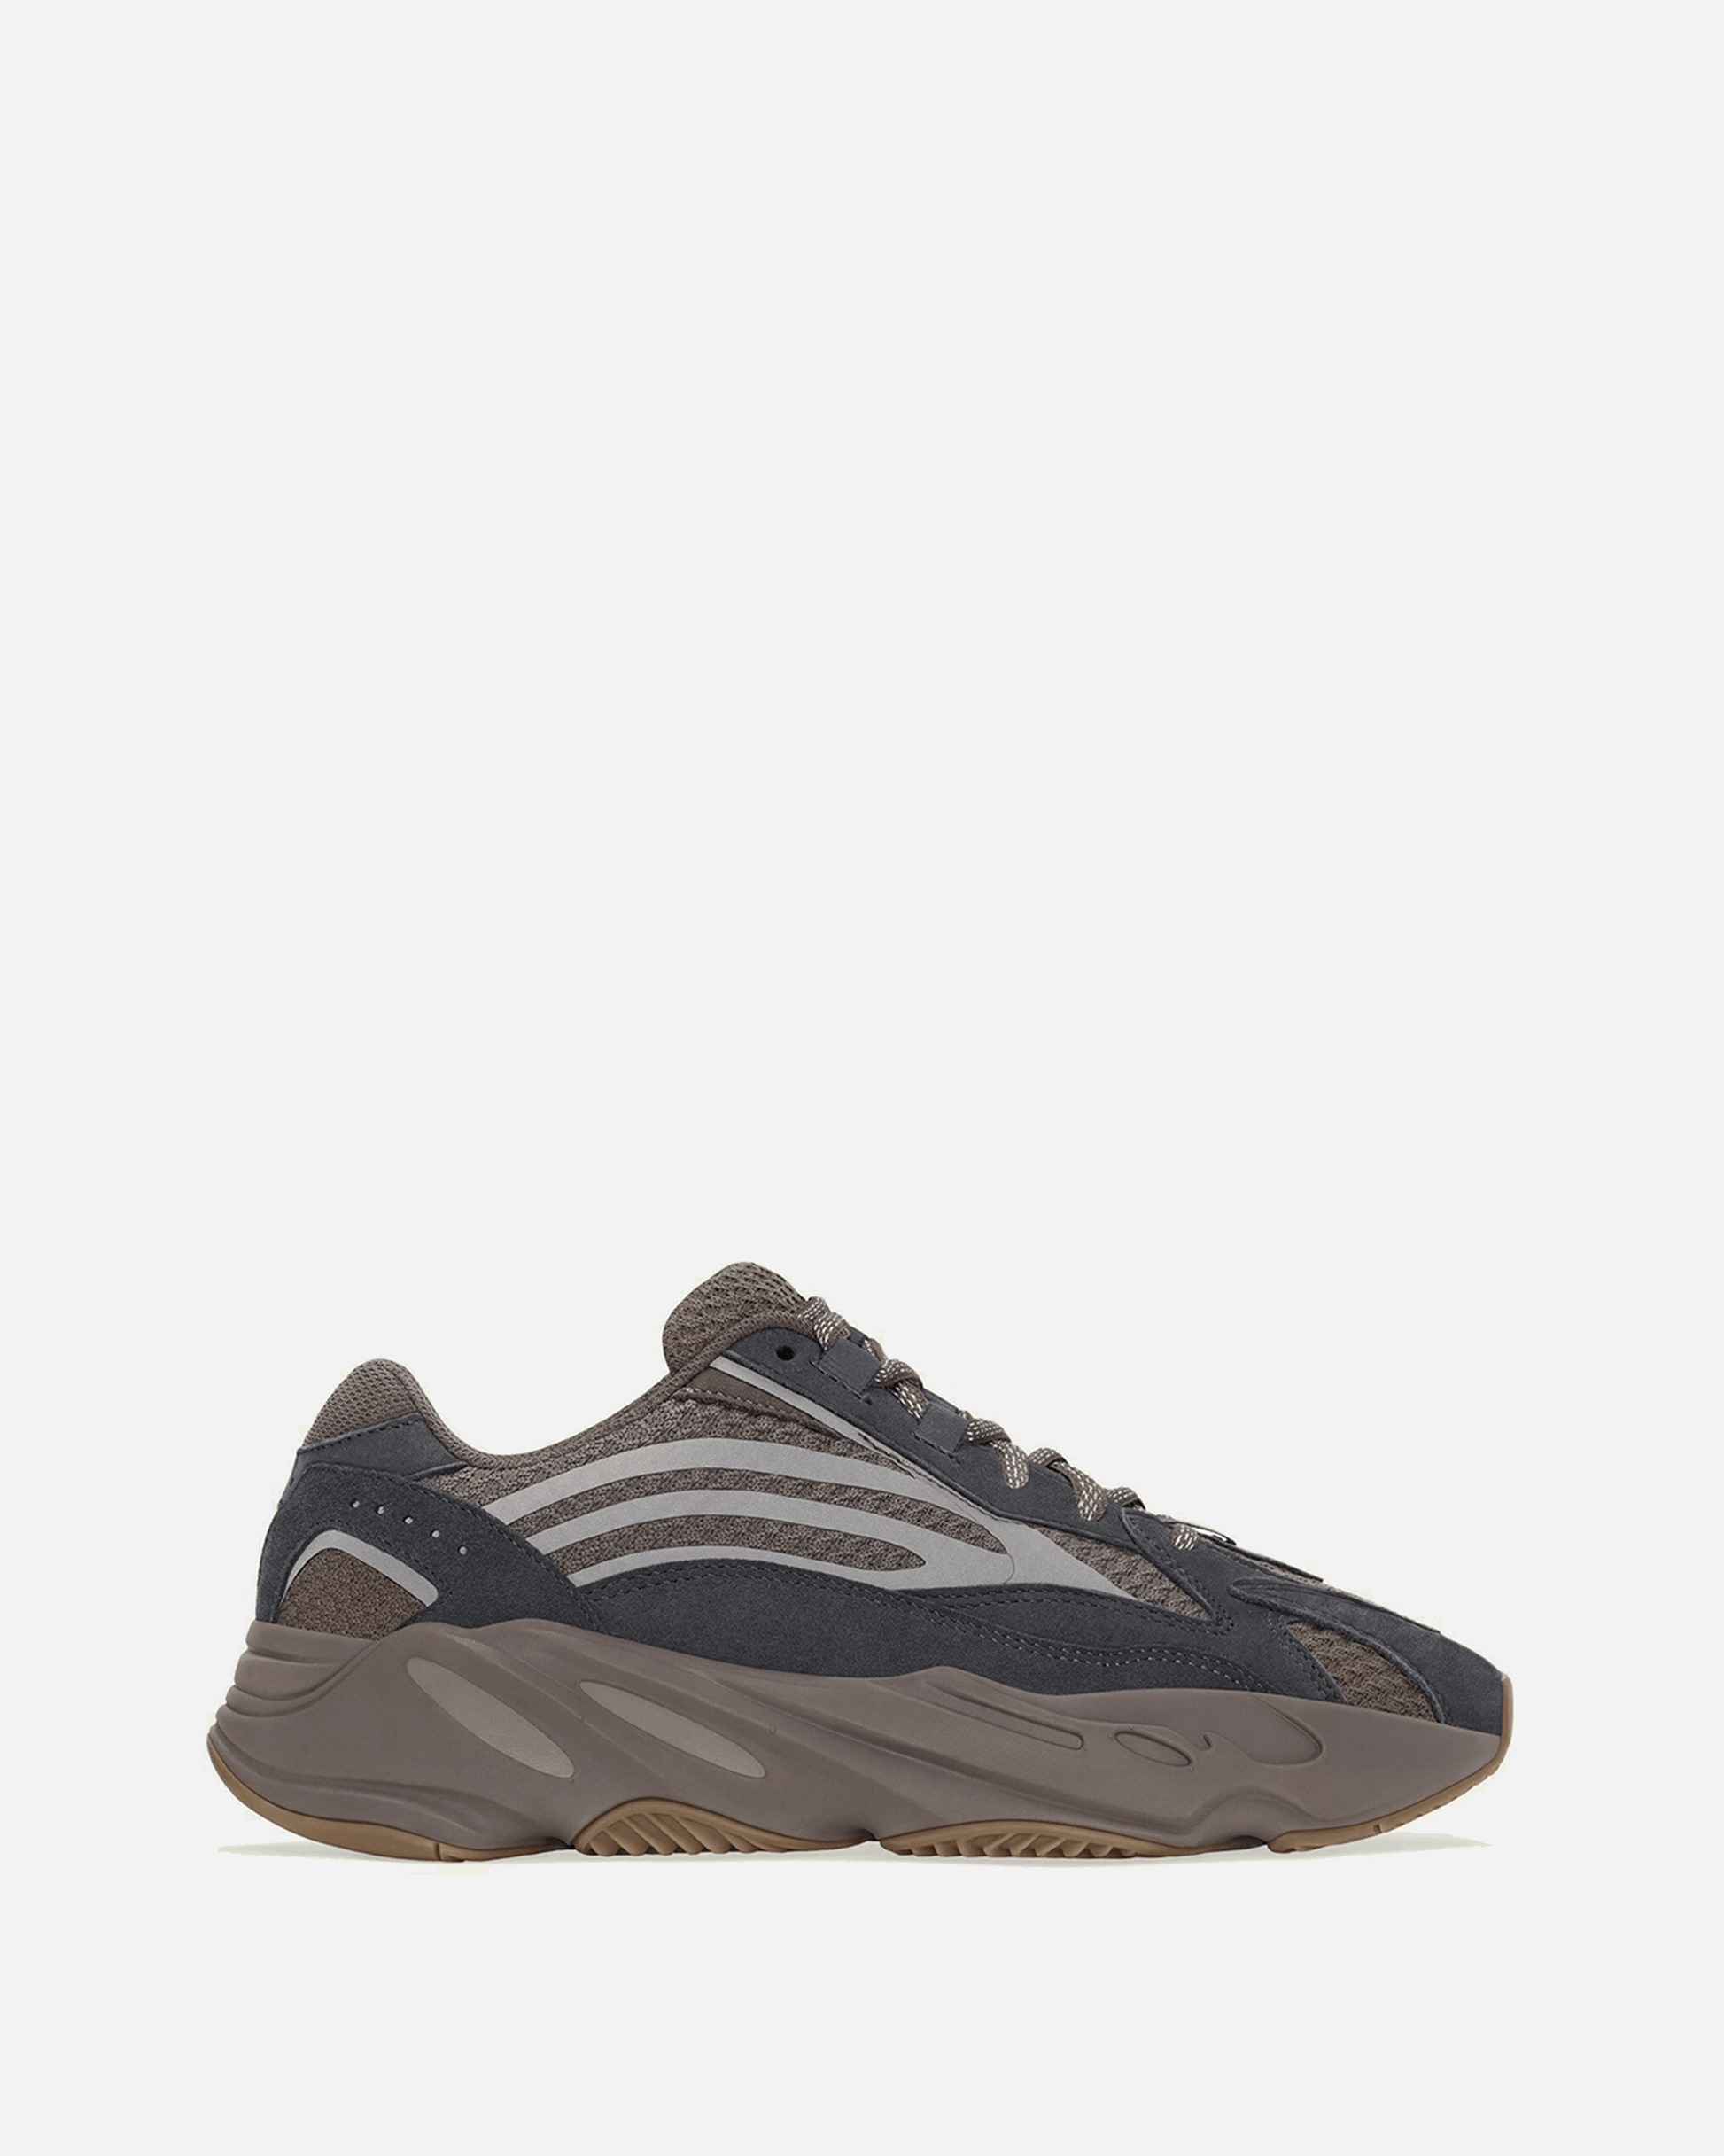 Adidas Releases Yeezy Boost 700 V2 'Mauve'